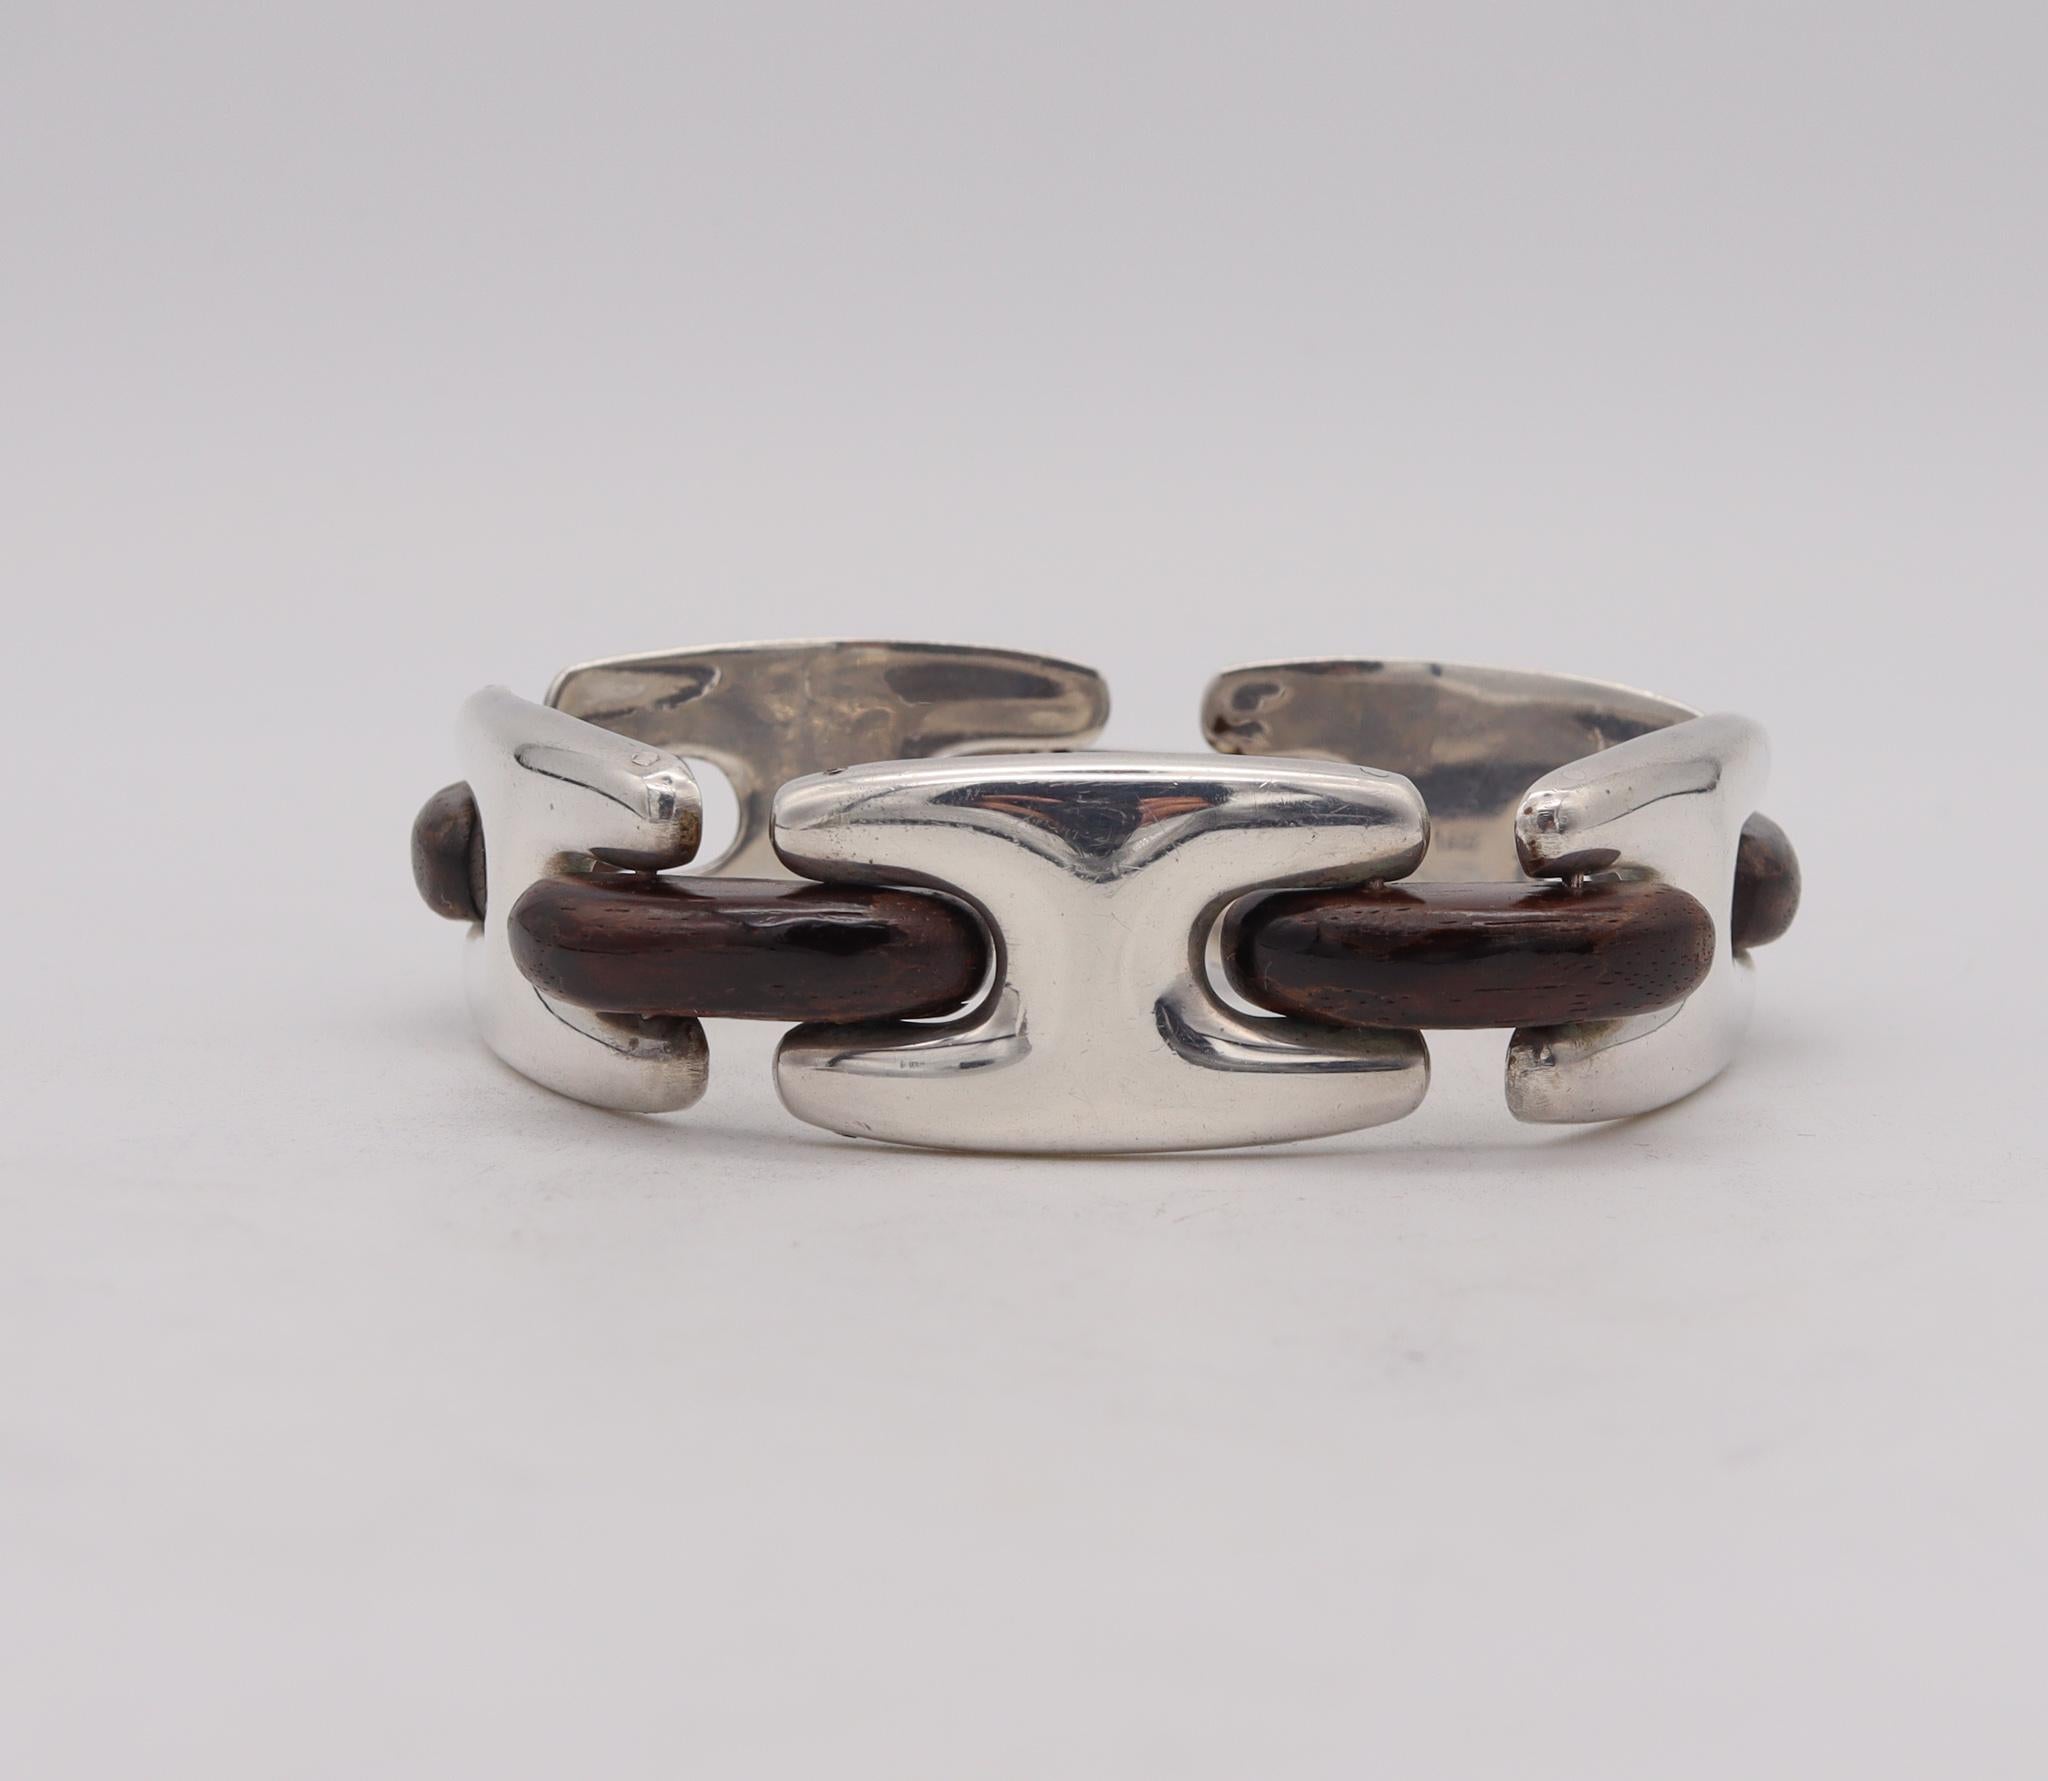 A wood bracelet designed by Missiaglia.

Gorgeous modernist bracelet, created in Venice Italy by the exclusive jewelry house of Missiaglia during the late mid-century period, back in the 1960's. This rare and outstanding bracelet has been carefully